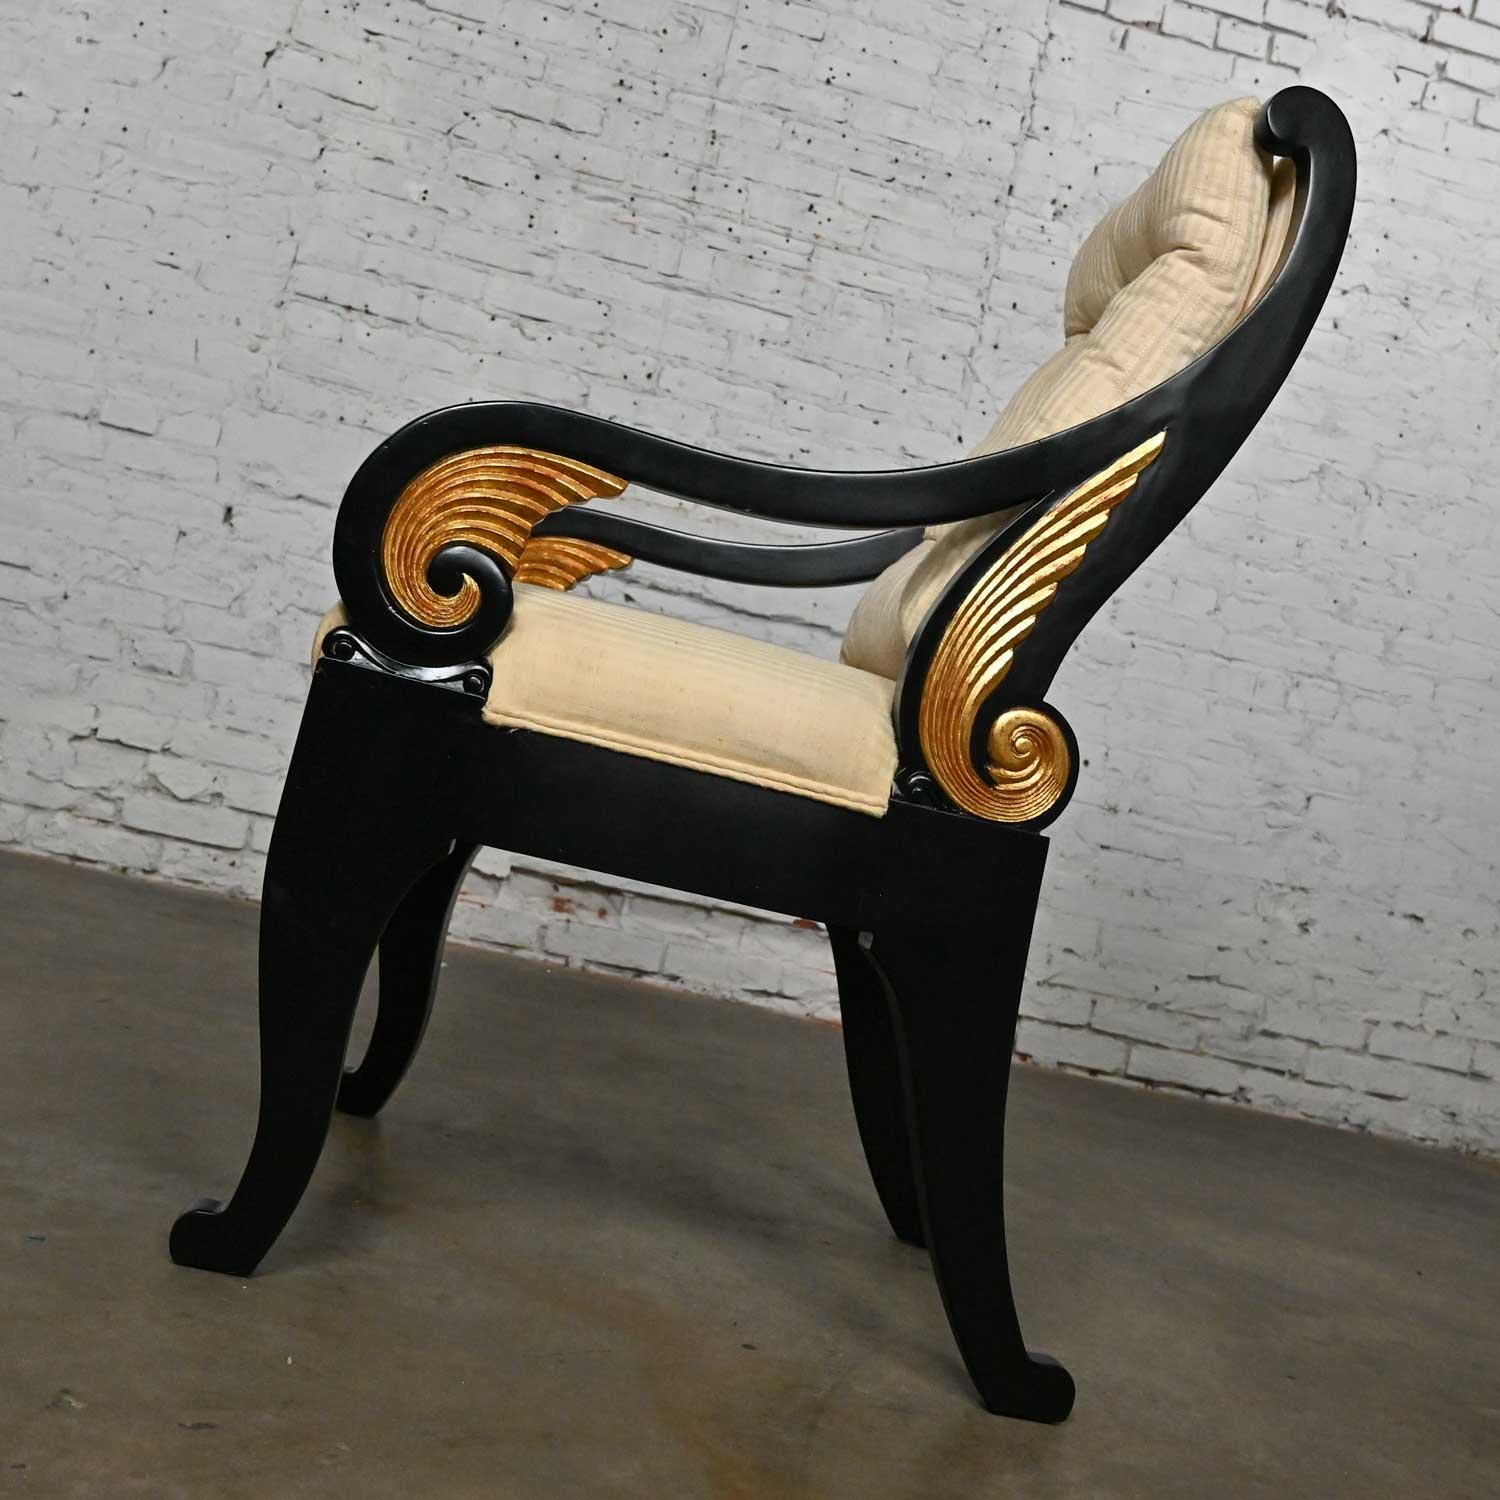 Late 20th Neoclassic Revival Black Side Chair Gilt Wing Accents Off-White Fabric In Good Condition For Sale In Topeka, KS